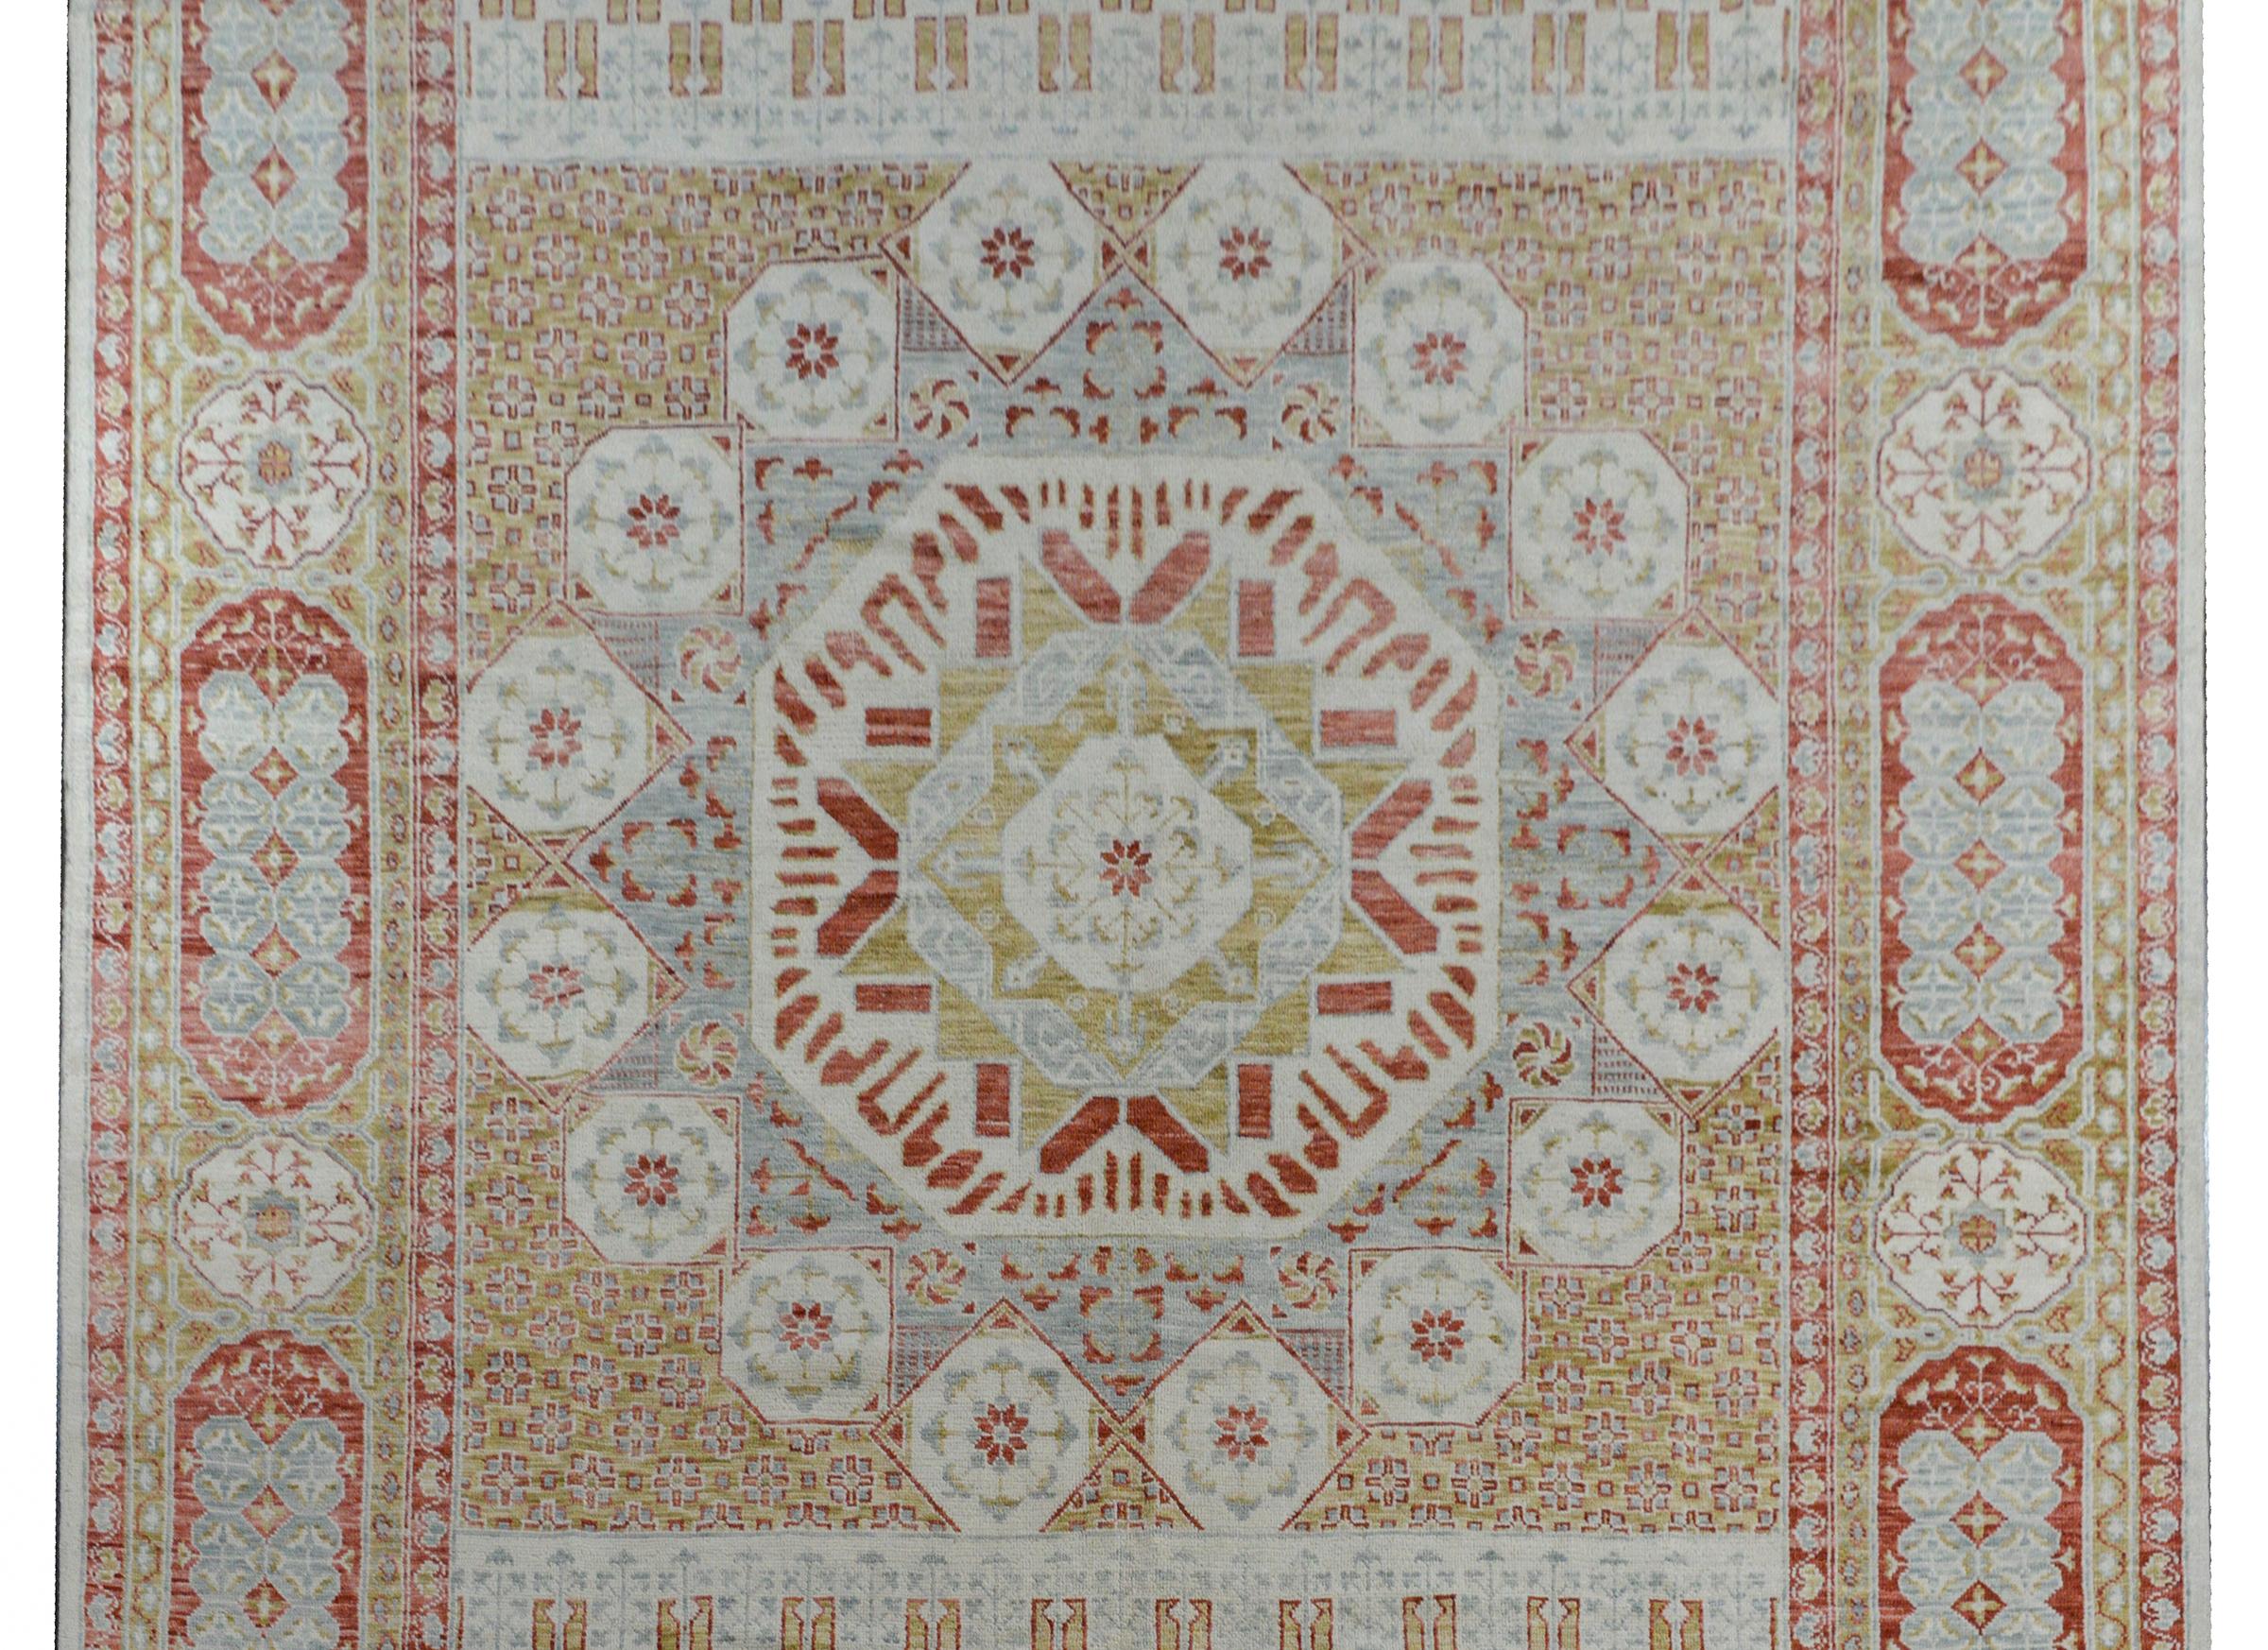 A beautiful contemporary Indian rug woven with a traditional Anatolian Turkish pattern with a large eight-sided medallion in the center amidst a field of flowers surrounded by a wide border containing myriad stylized flowers and scrolling vines.